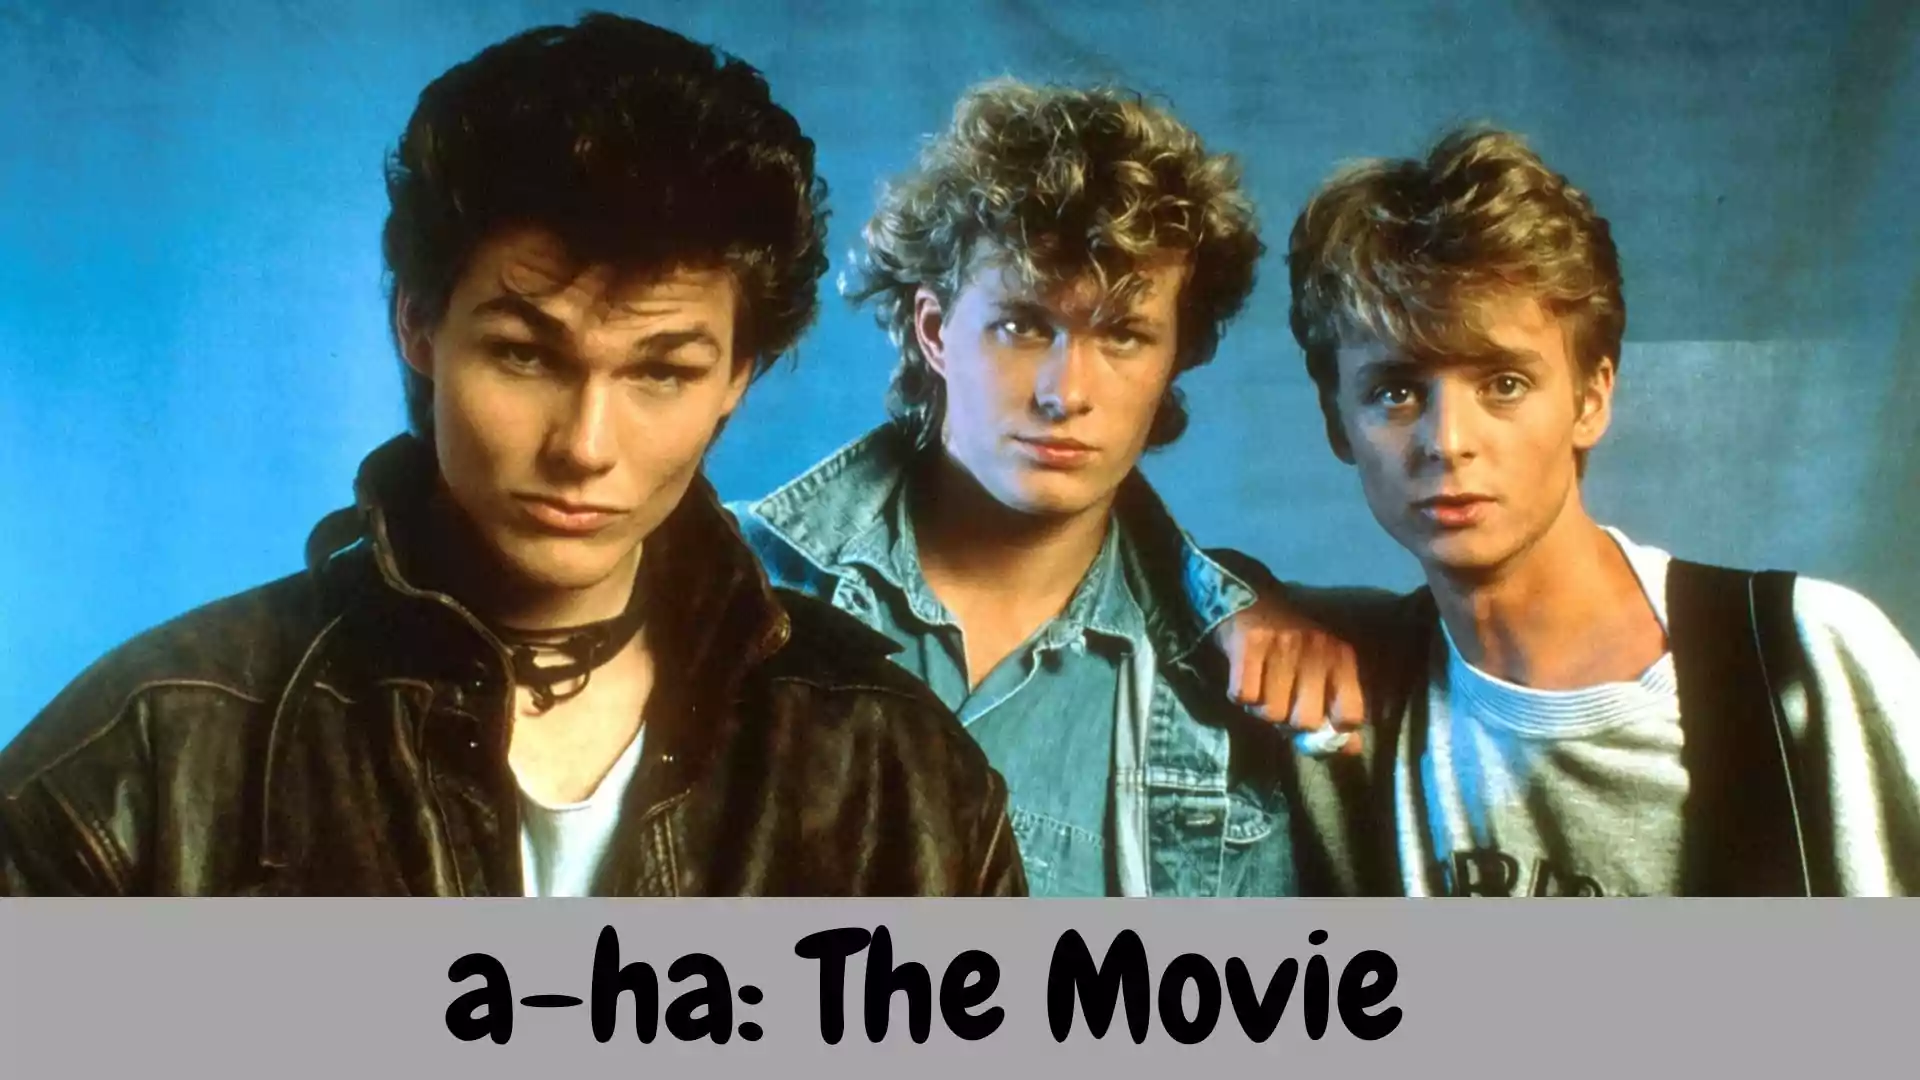 a-ha The Movie Wallpaper and Image